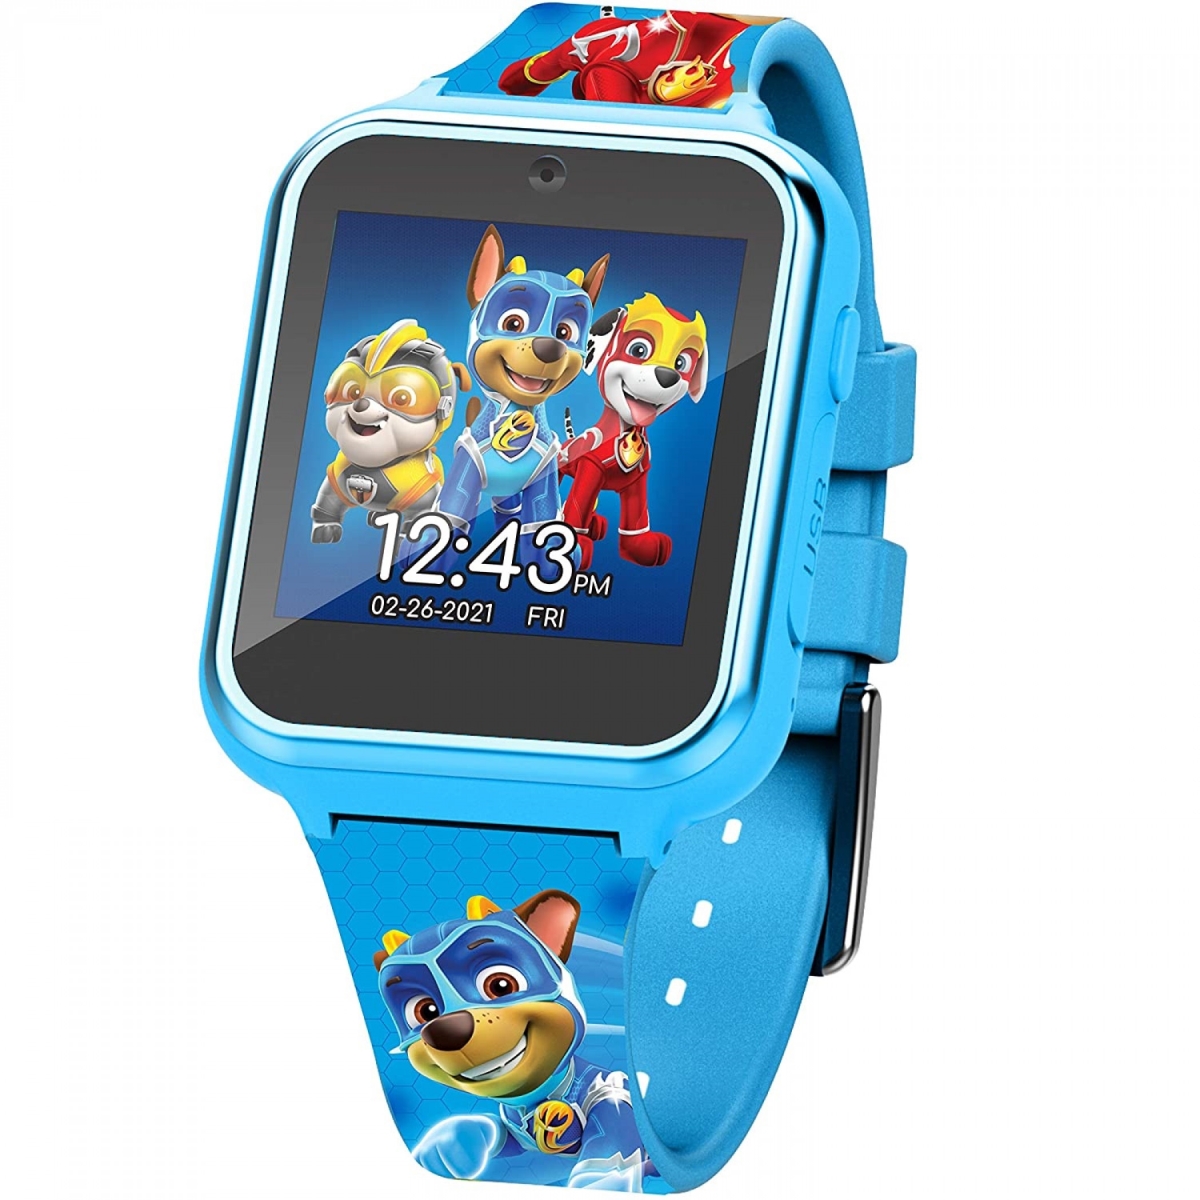 Picture of Paw Patrol 817900 Paw Patrol Accutime Interactive Kids Watch, Blue